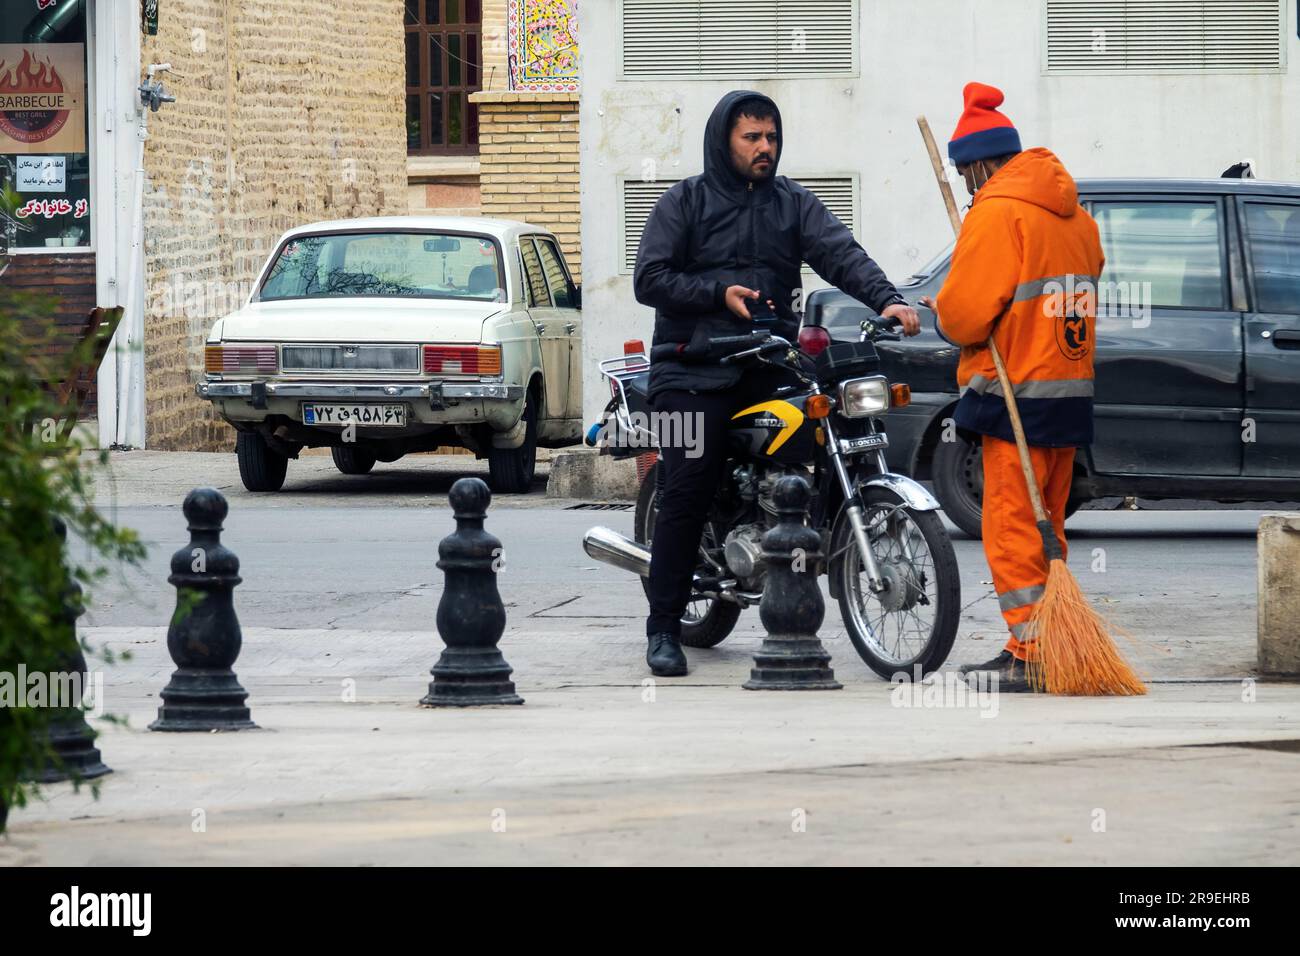 Shiraz, Iran- December 31, 2022: Everyday life of Iranians. An Iranian biker on a Chinese motorcycle talks to a janitor in overalls Stock Photo